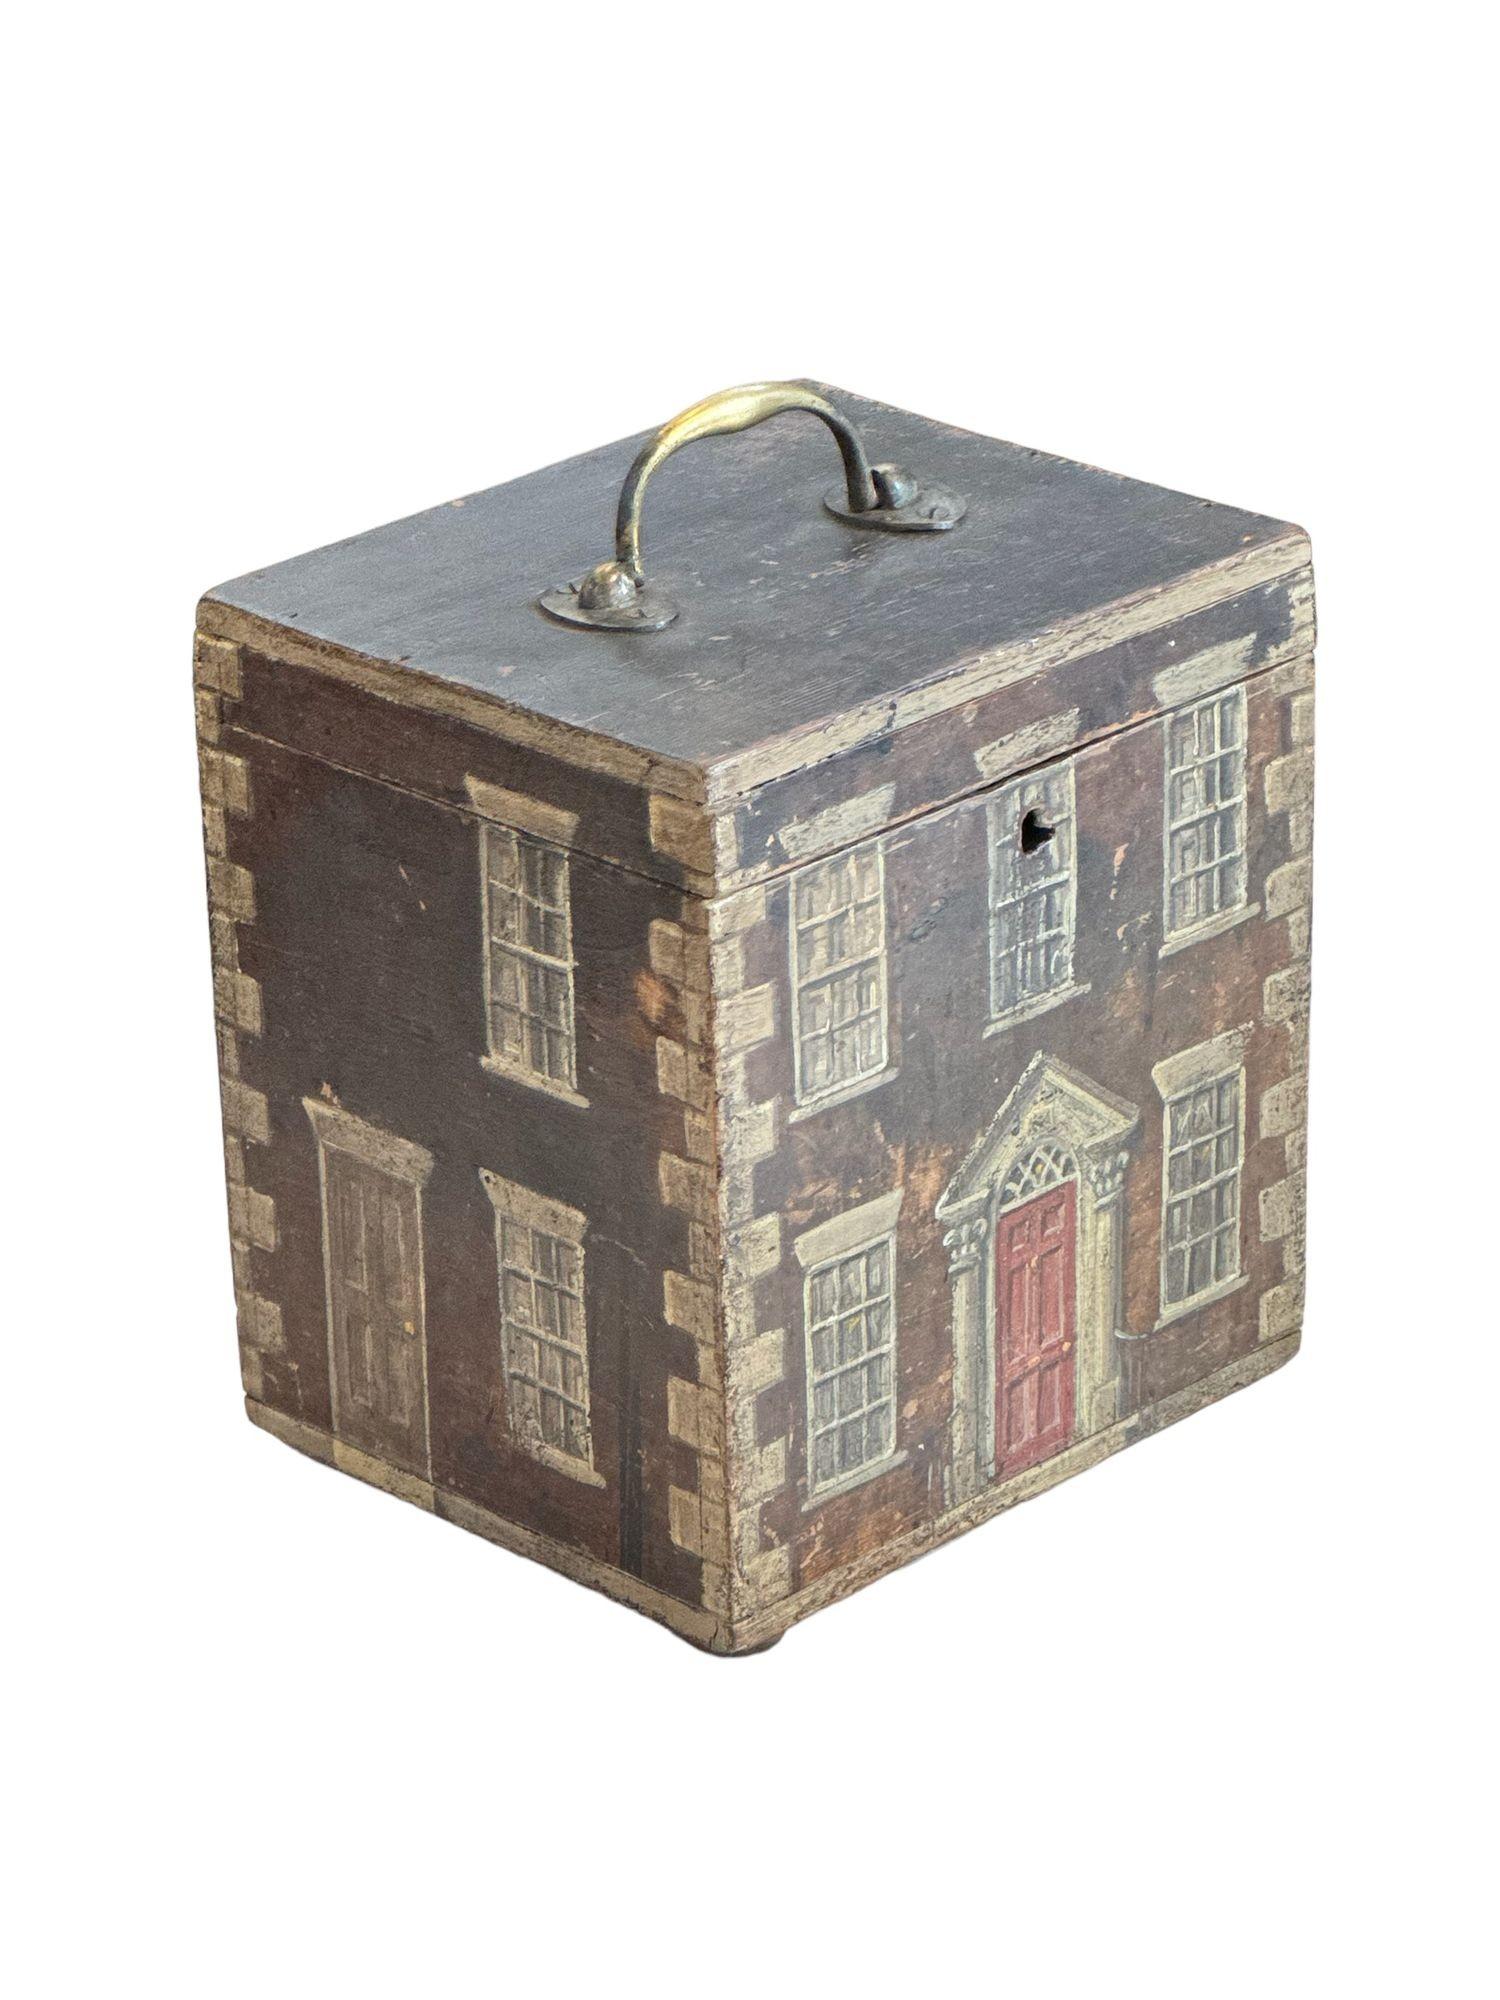 A tromp l'oeil painted box in the manner of a georgian house. H. 10inches, W. 8 inches, D. 6.75 inches
Good condition, but lacking lock.